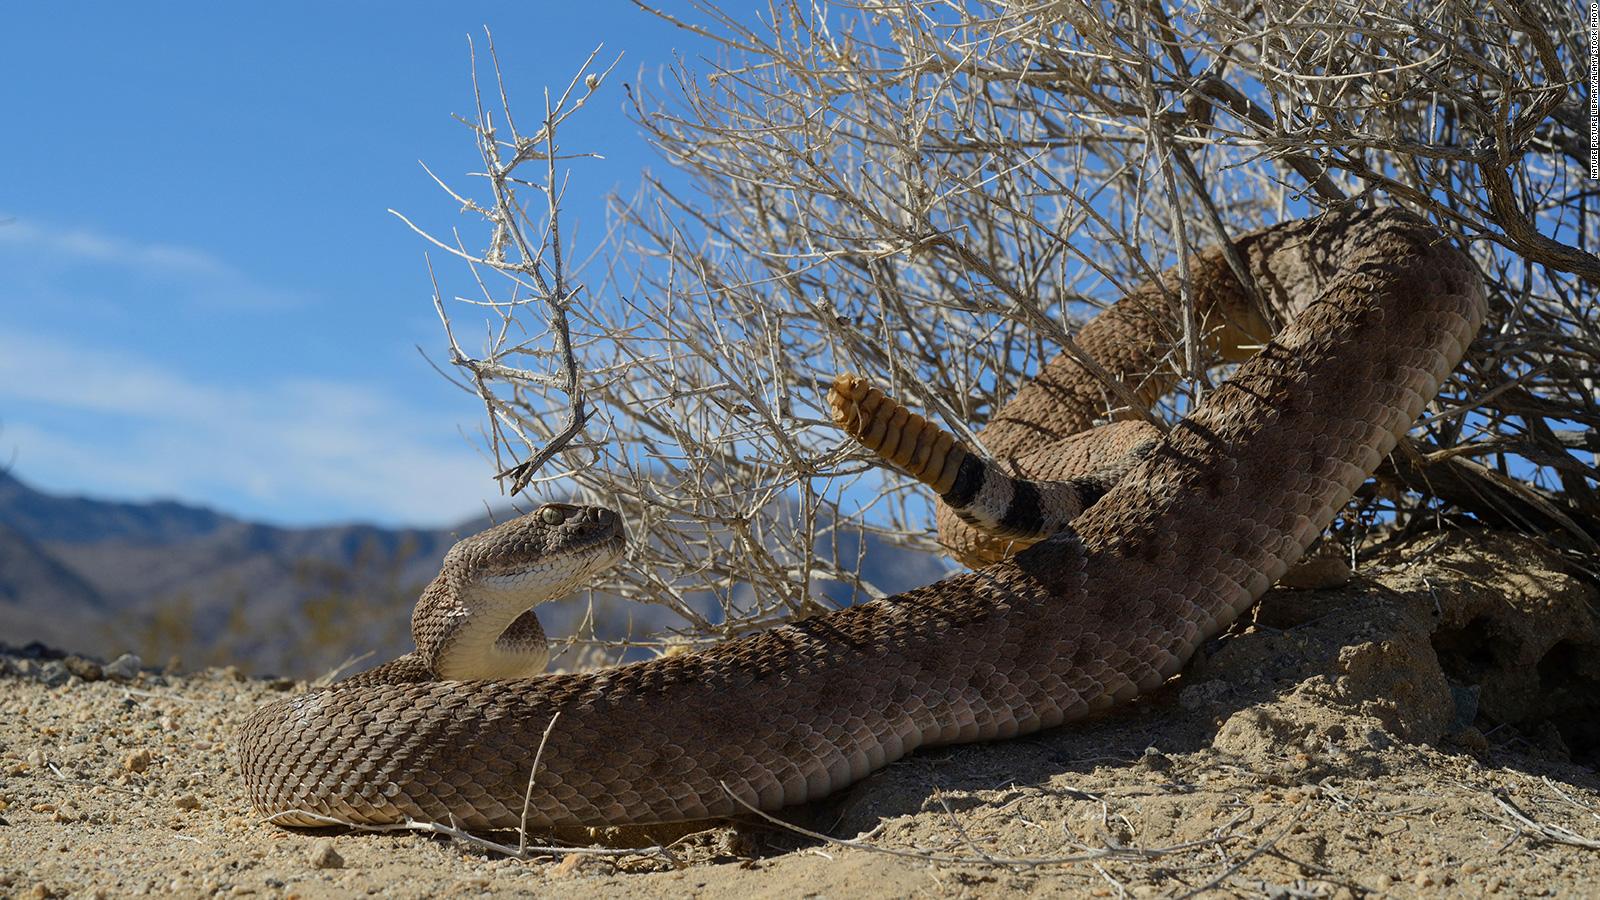 can a dog survive a rattlesnake bite